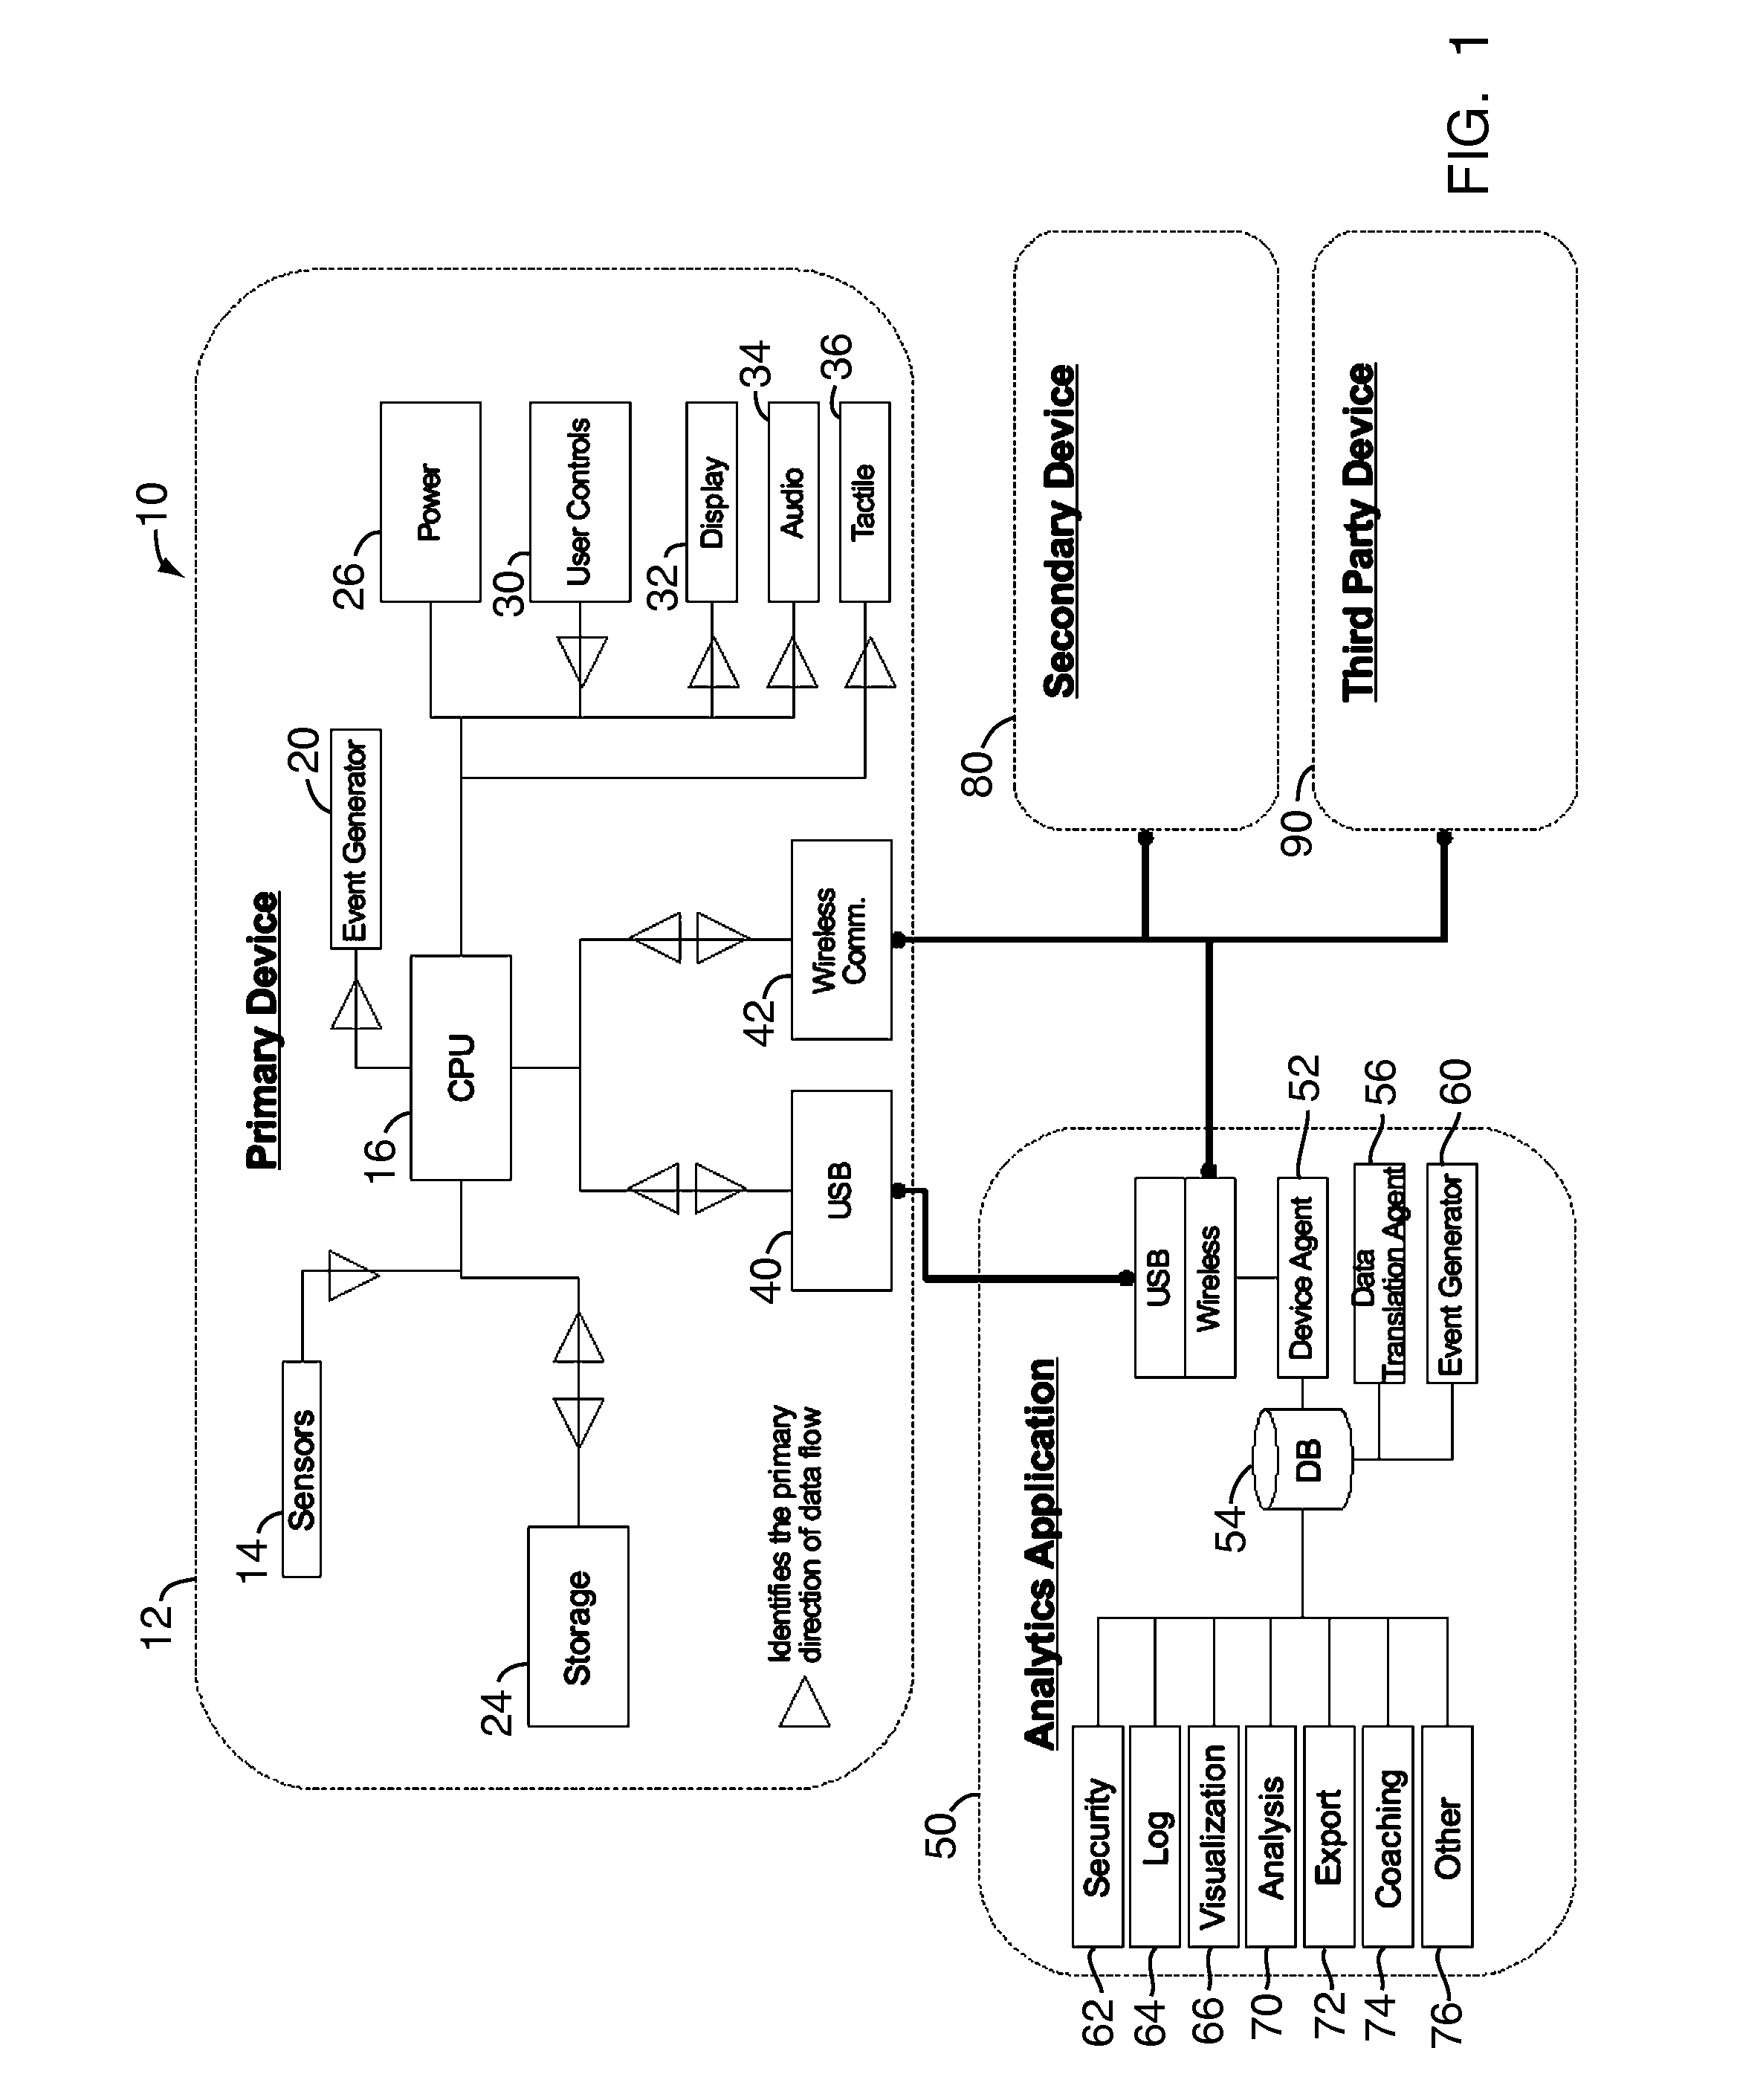 Multi-state performance monitoring system